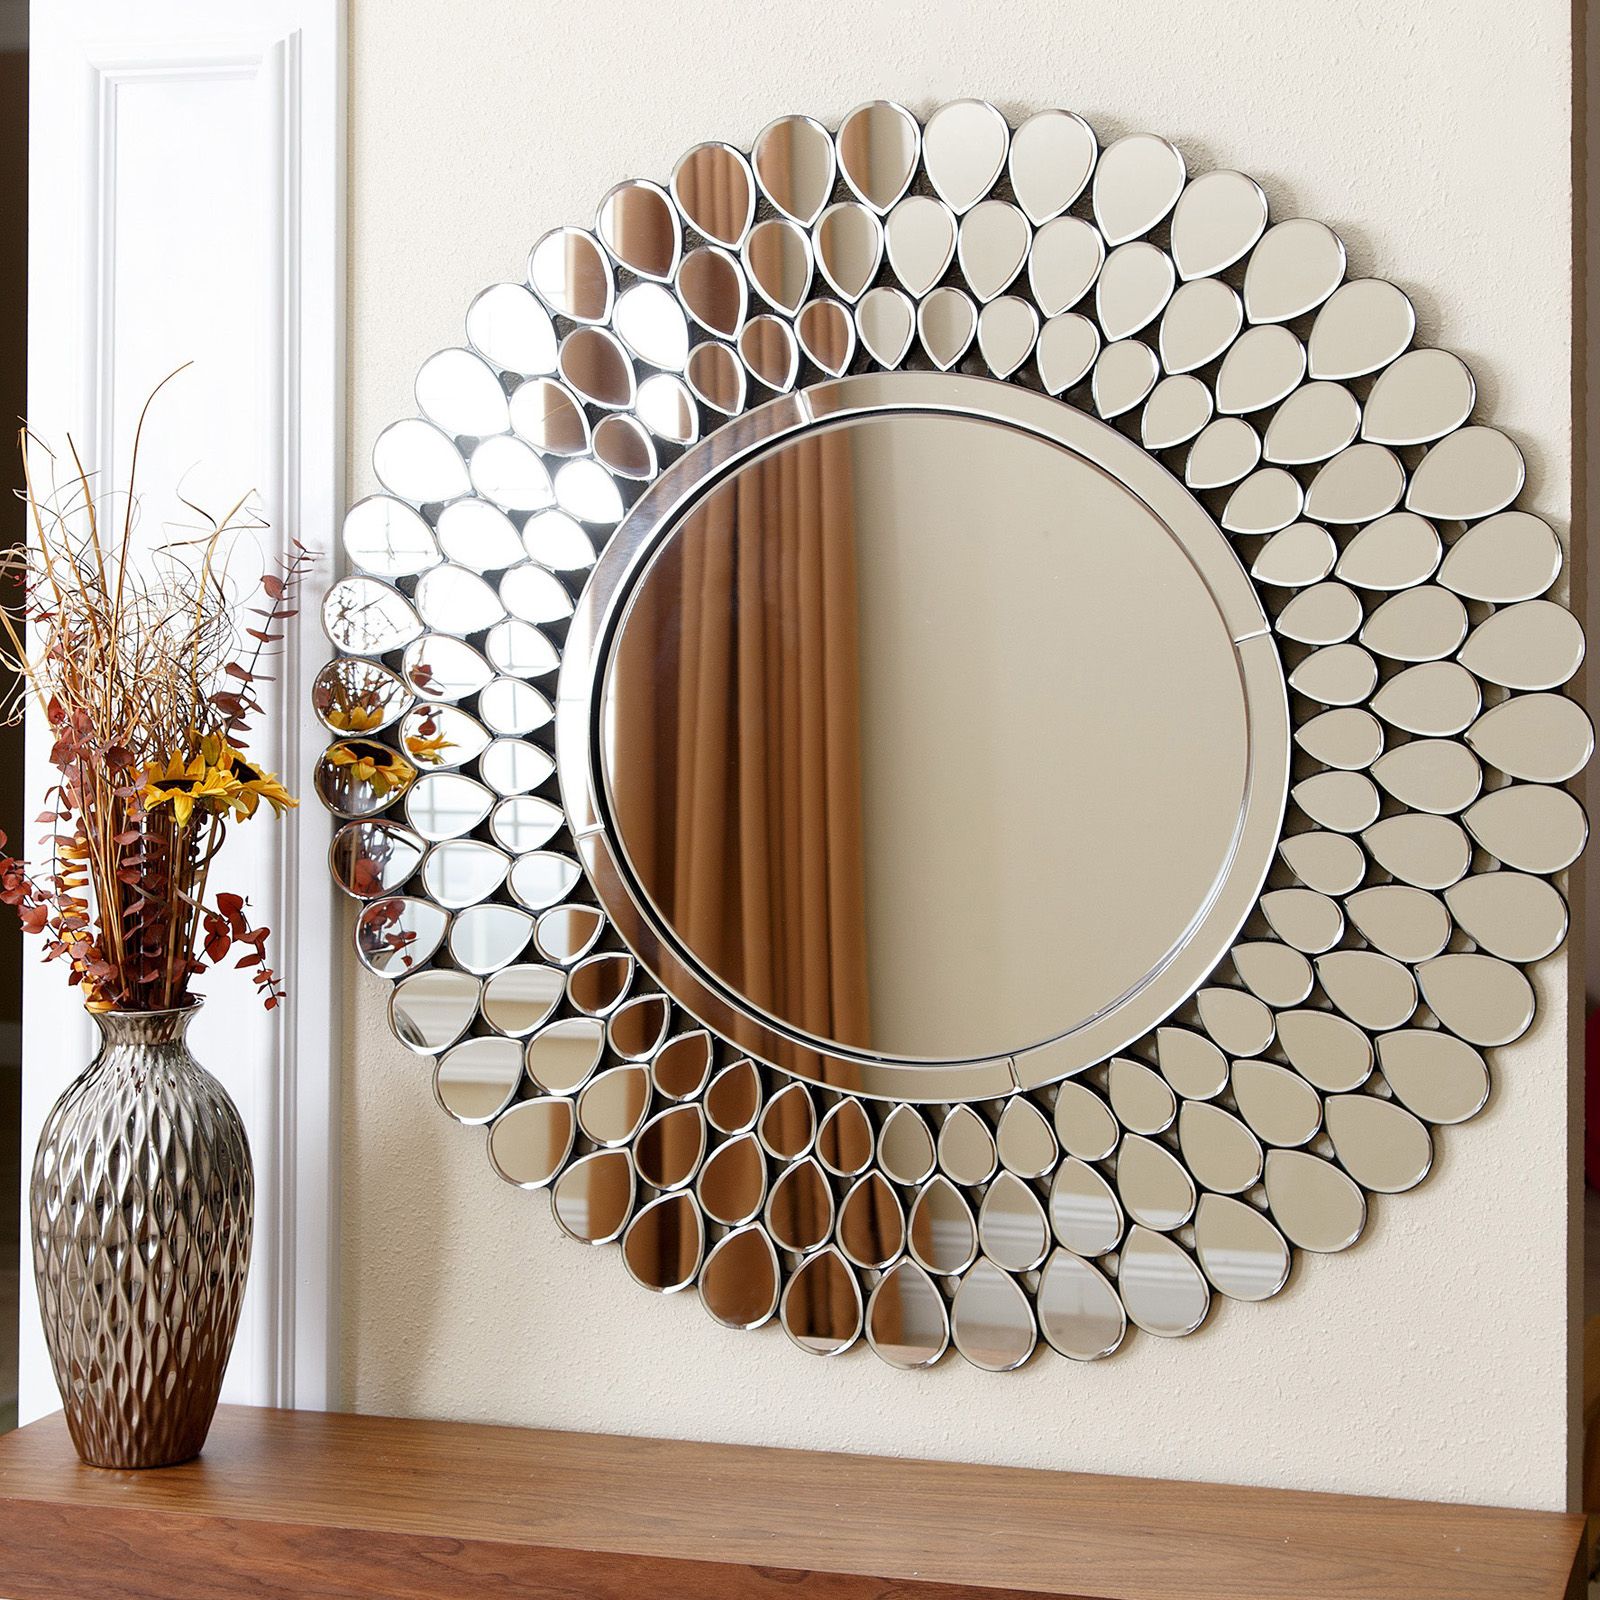 Abbyson Living Reagan Round Wall Mirror – Mirrors At Hayneedle Pertaining To Most Up To Date Jagged Edge Round Wall Mirrors (View 14 of 15)